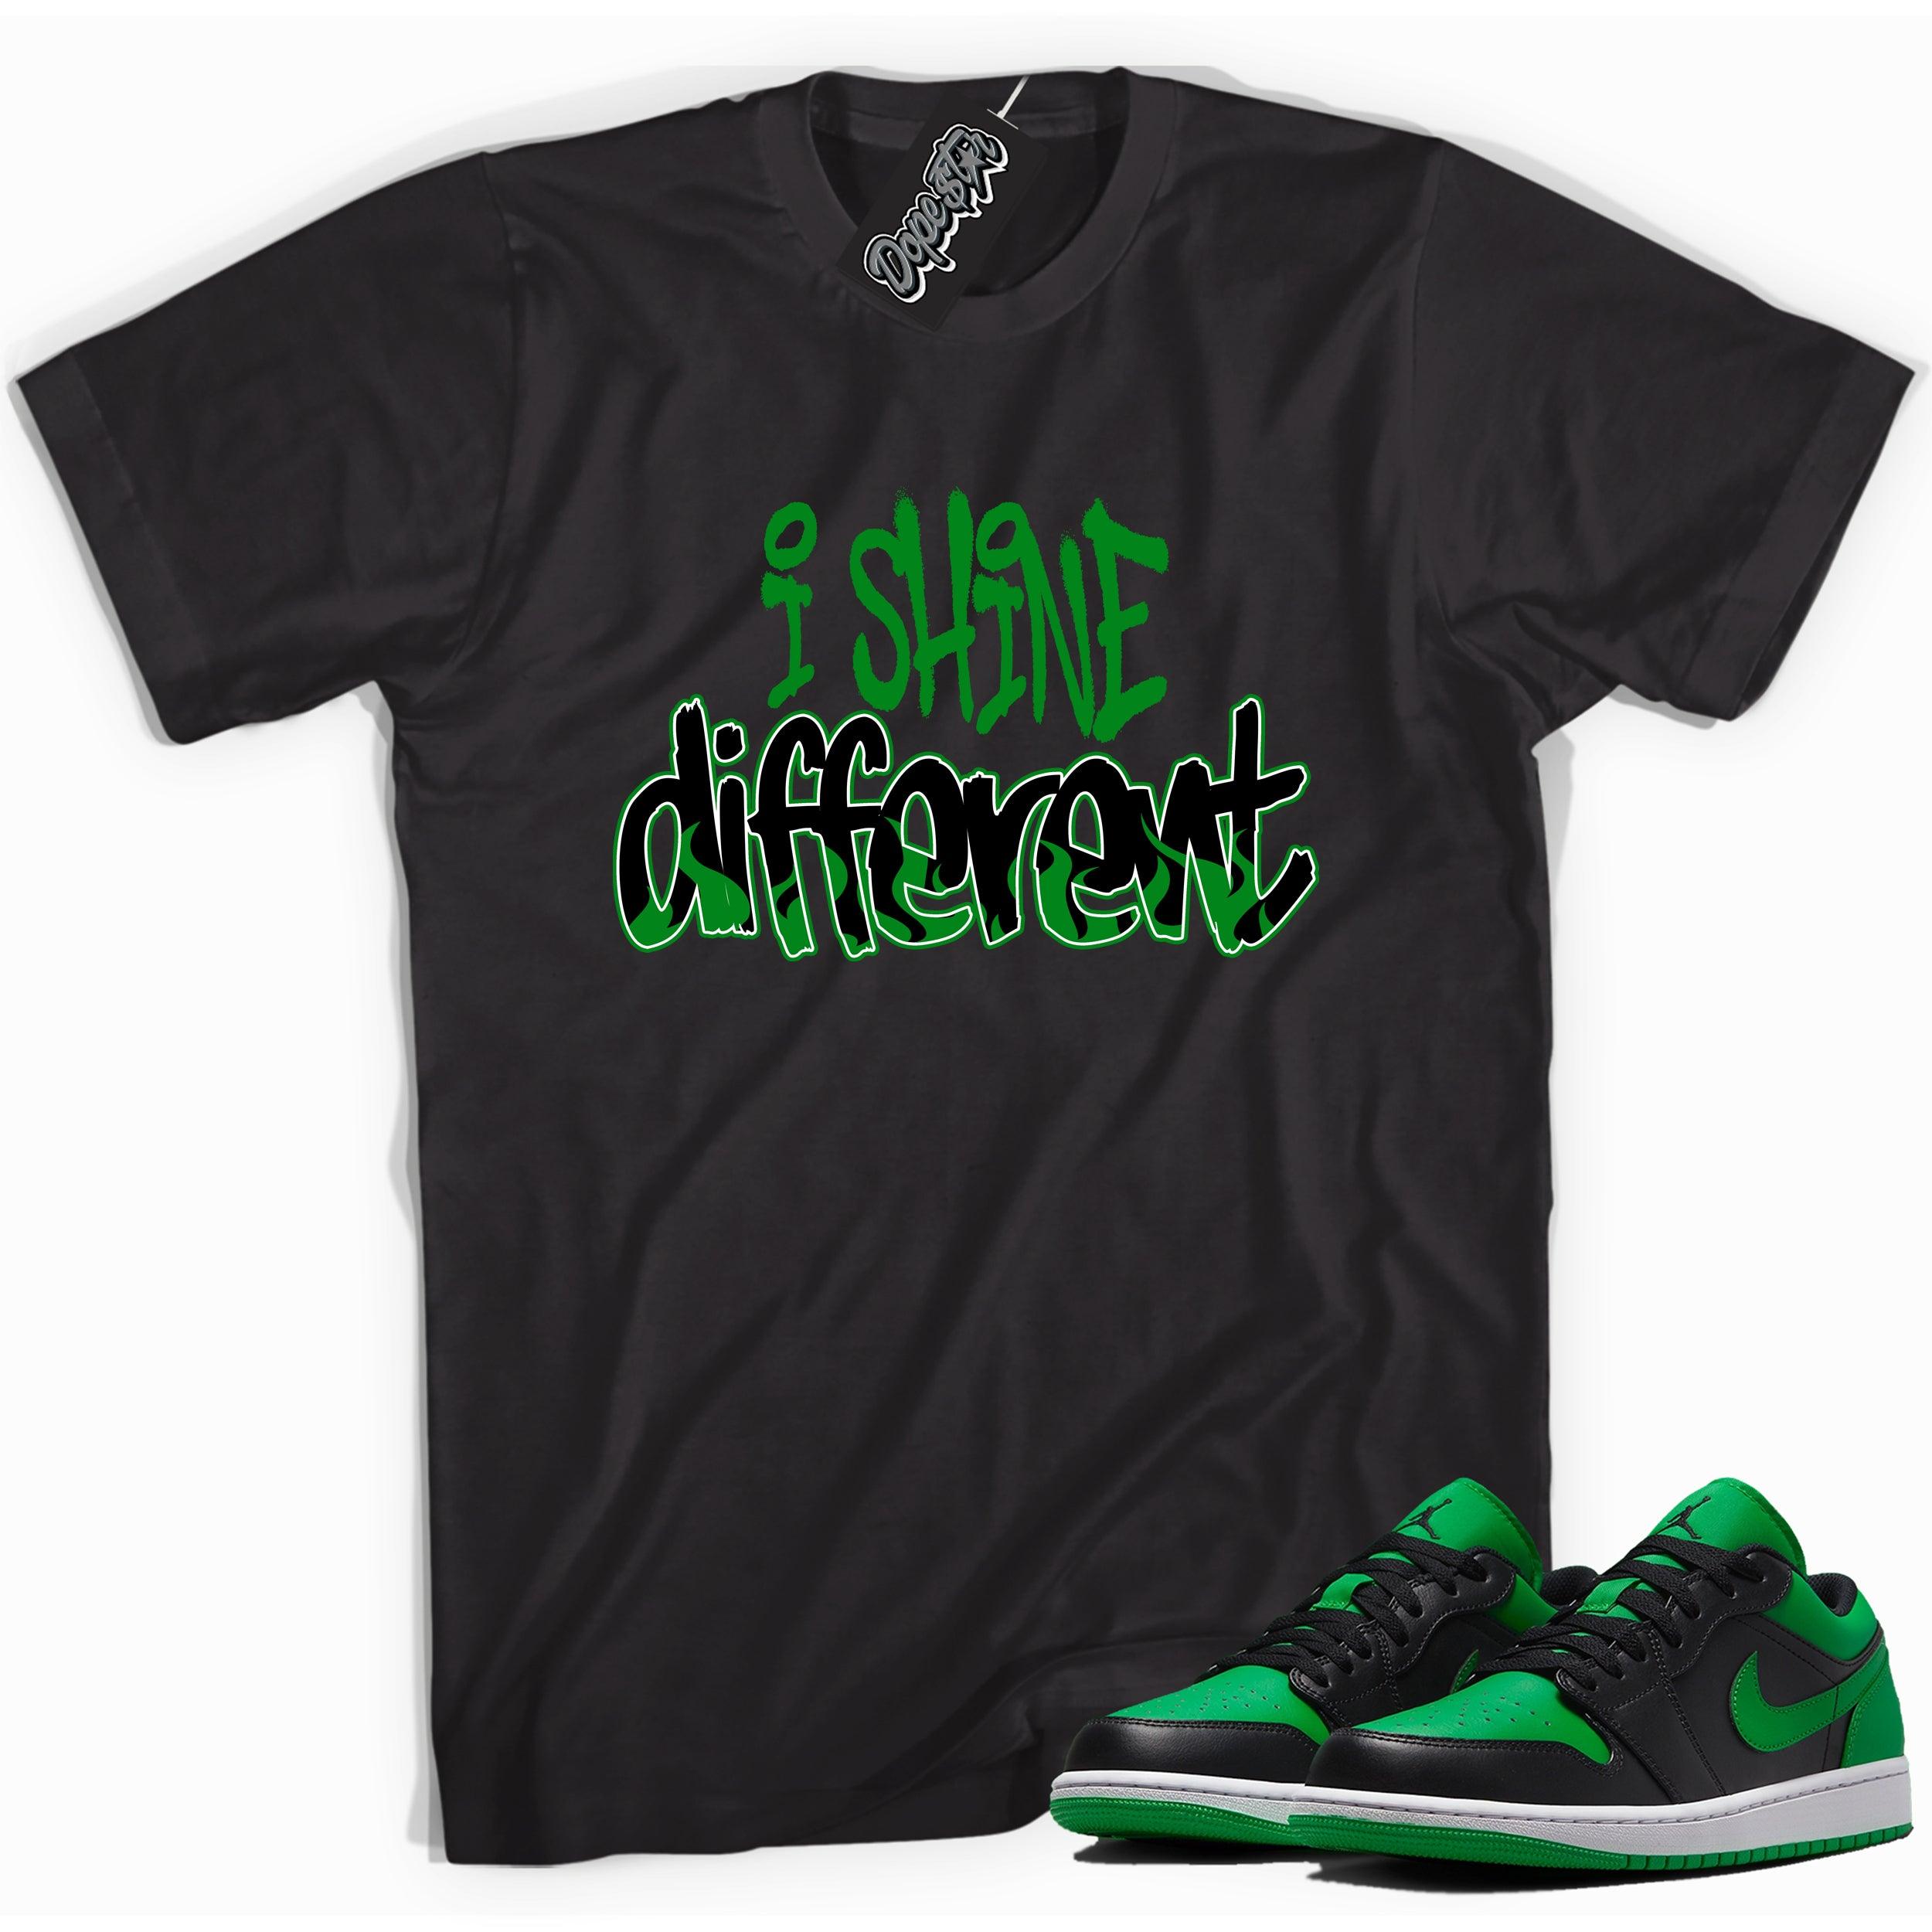 Cool black graphic tee with 'Shine Different' print, that perfectly matches Air Jordan 1 Low Lucky Green sneakers